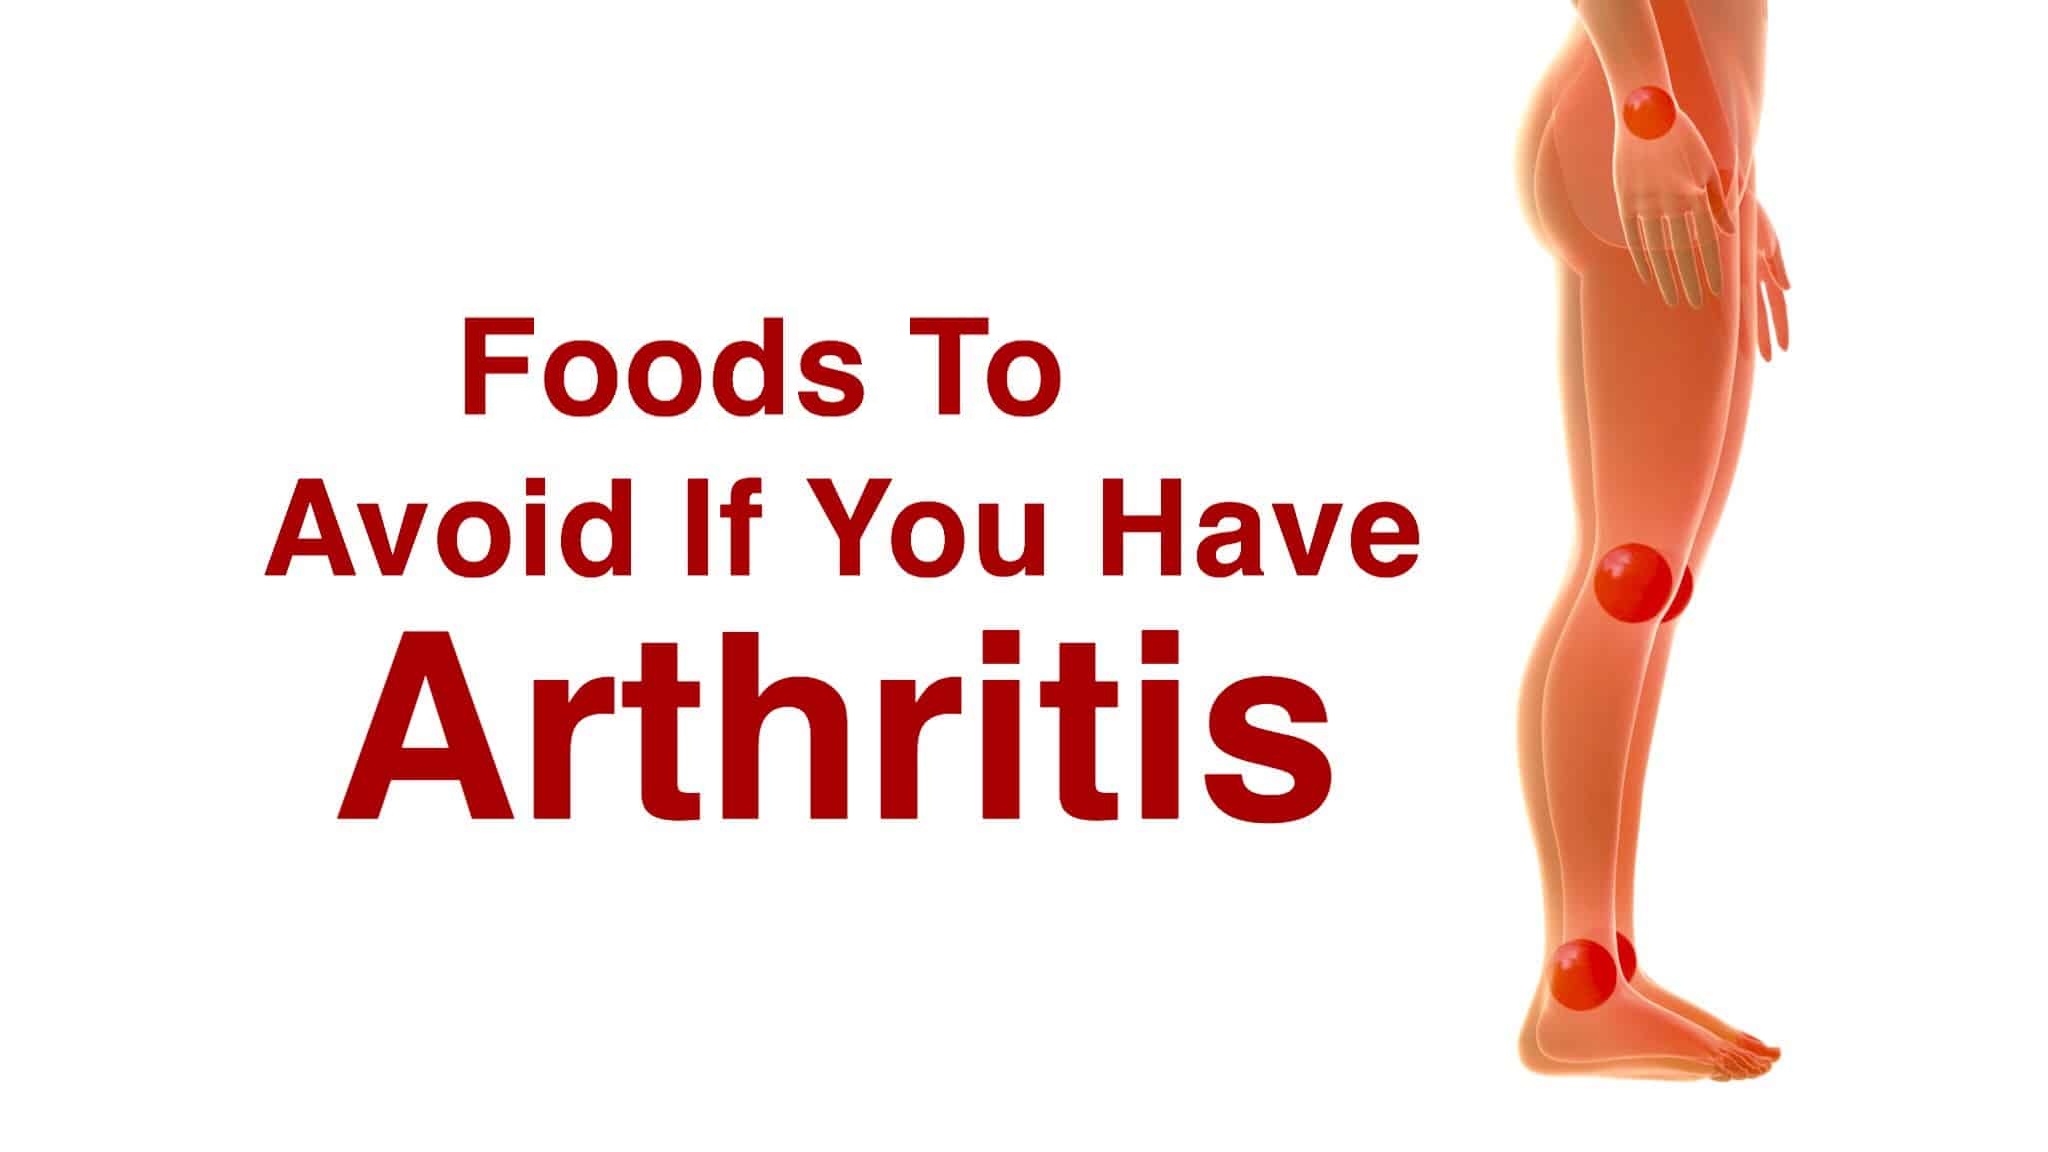 Foods You Should Avoid if You Have Arthritis